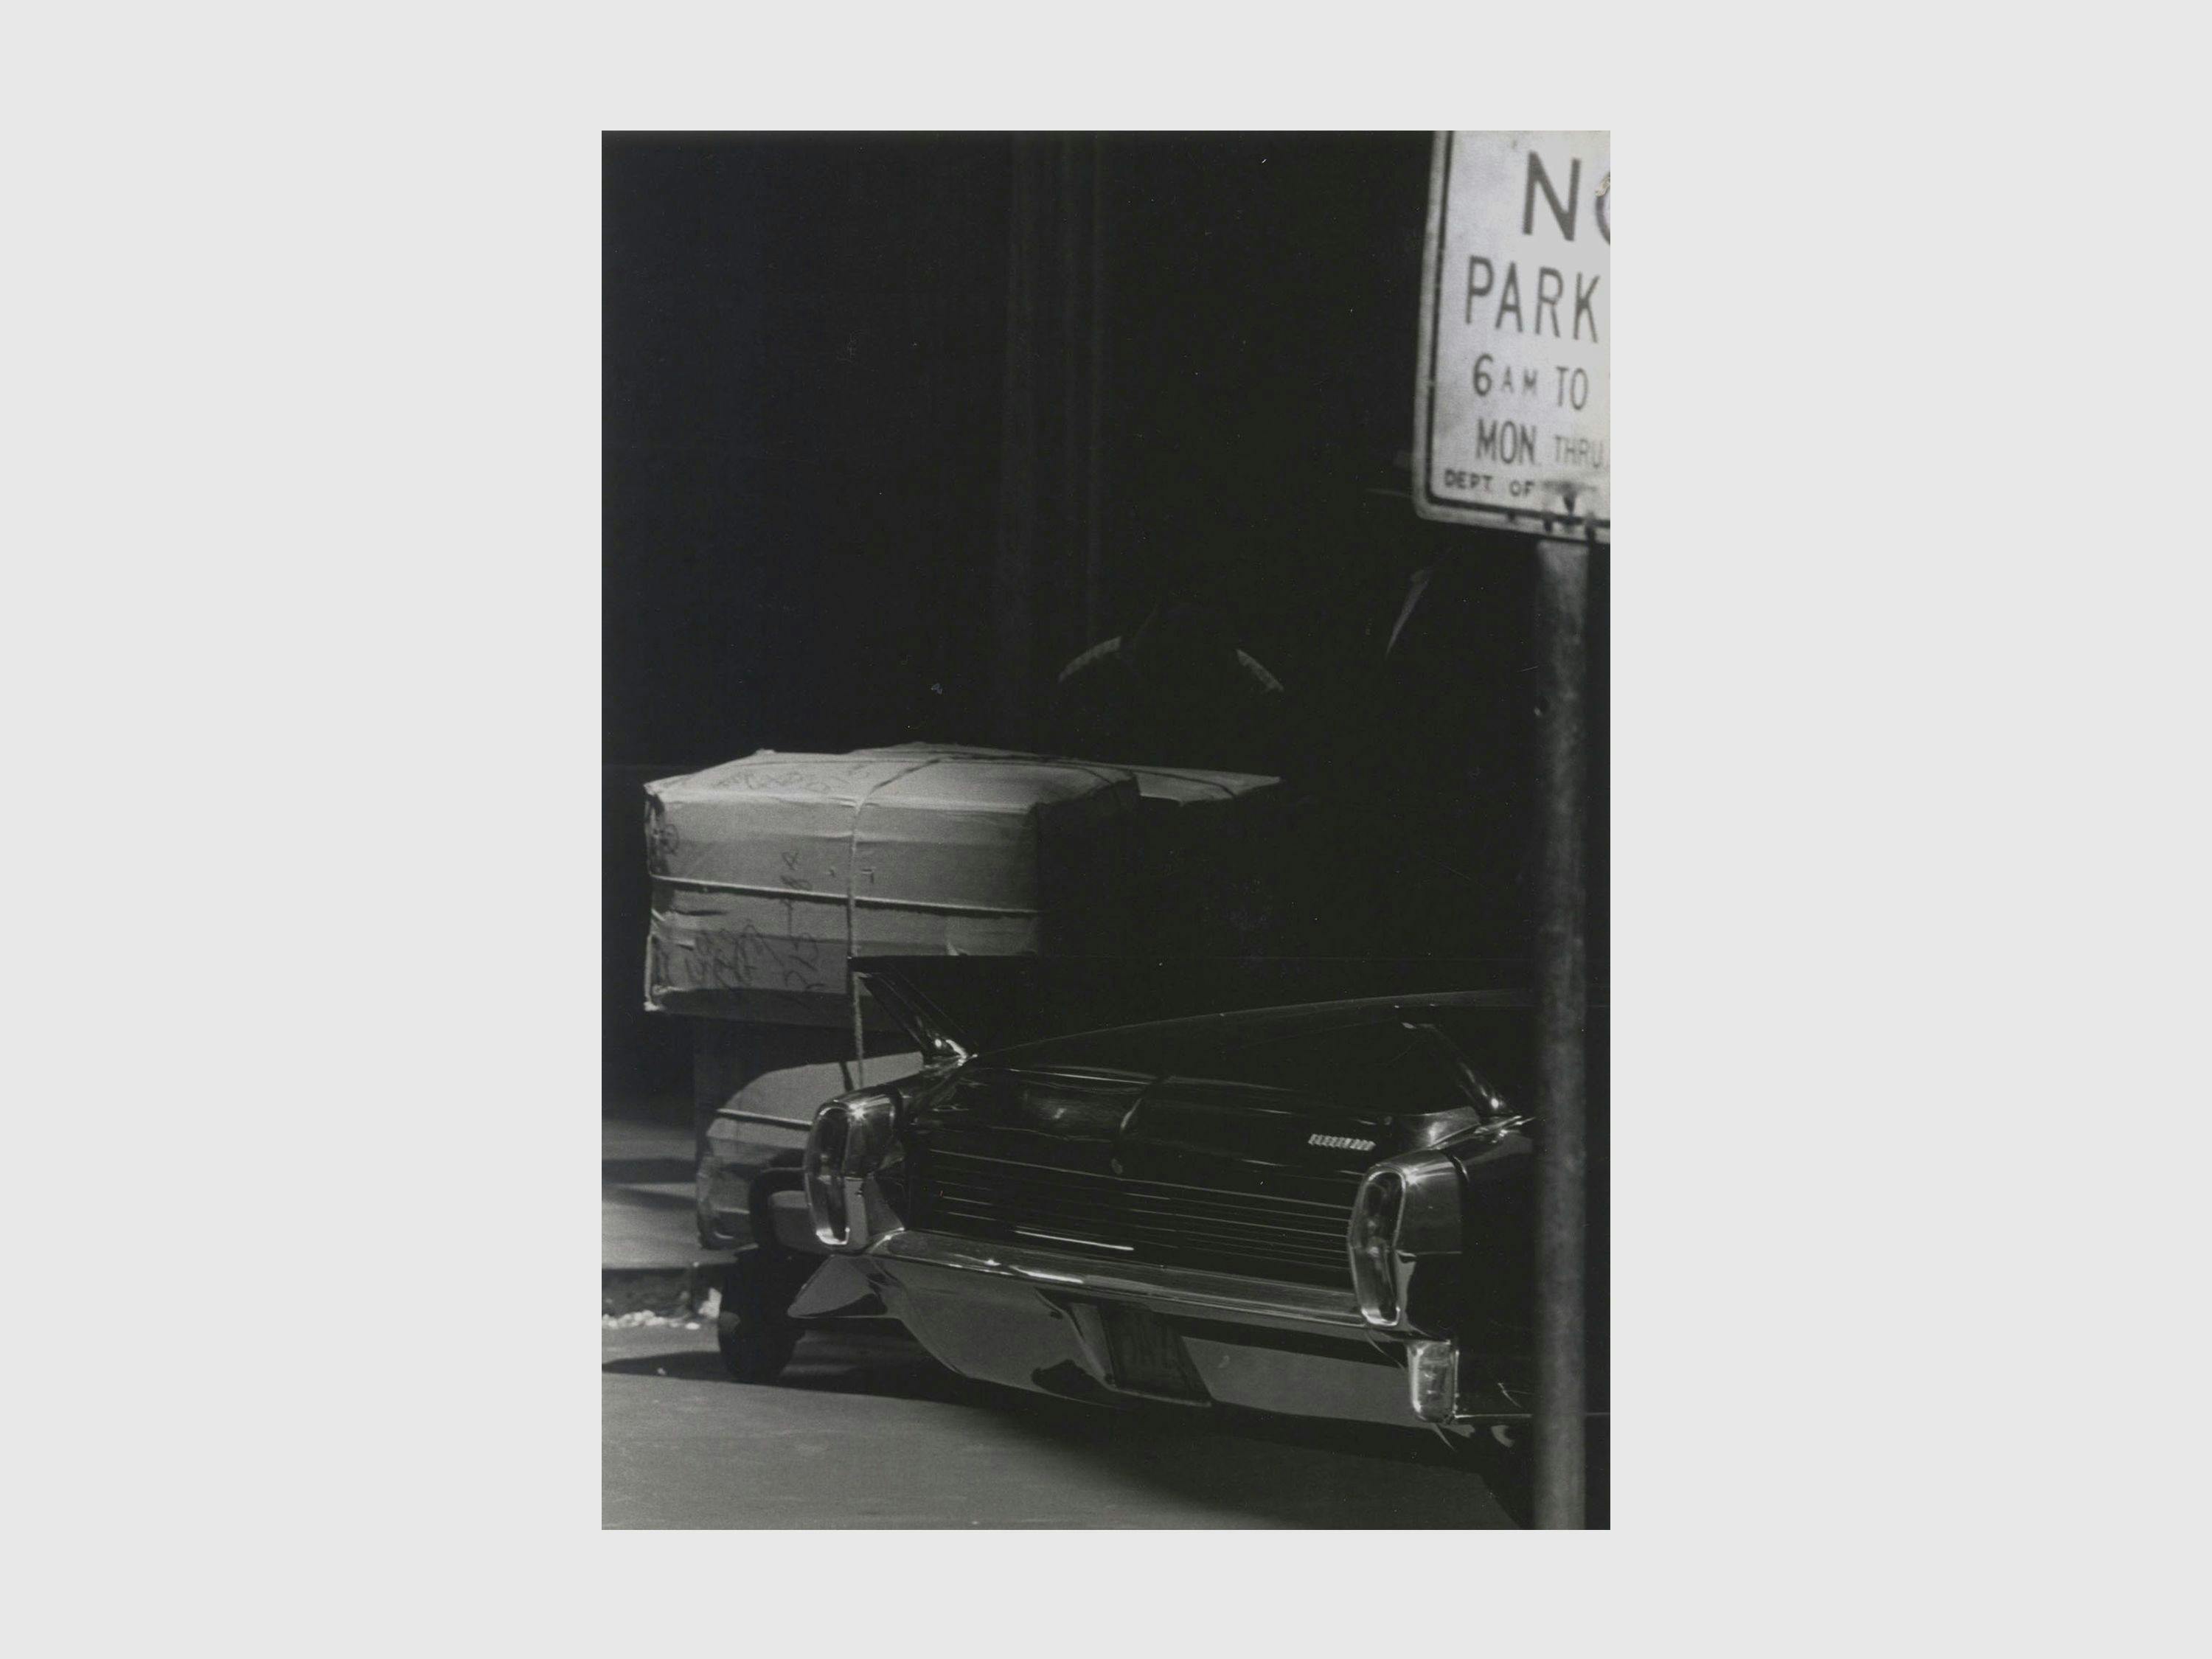 A photograph by Roy de Carava titled Two men boxes and car, dated 1966.